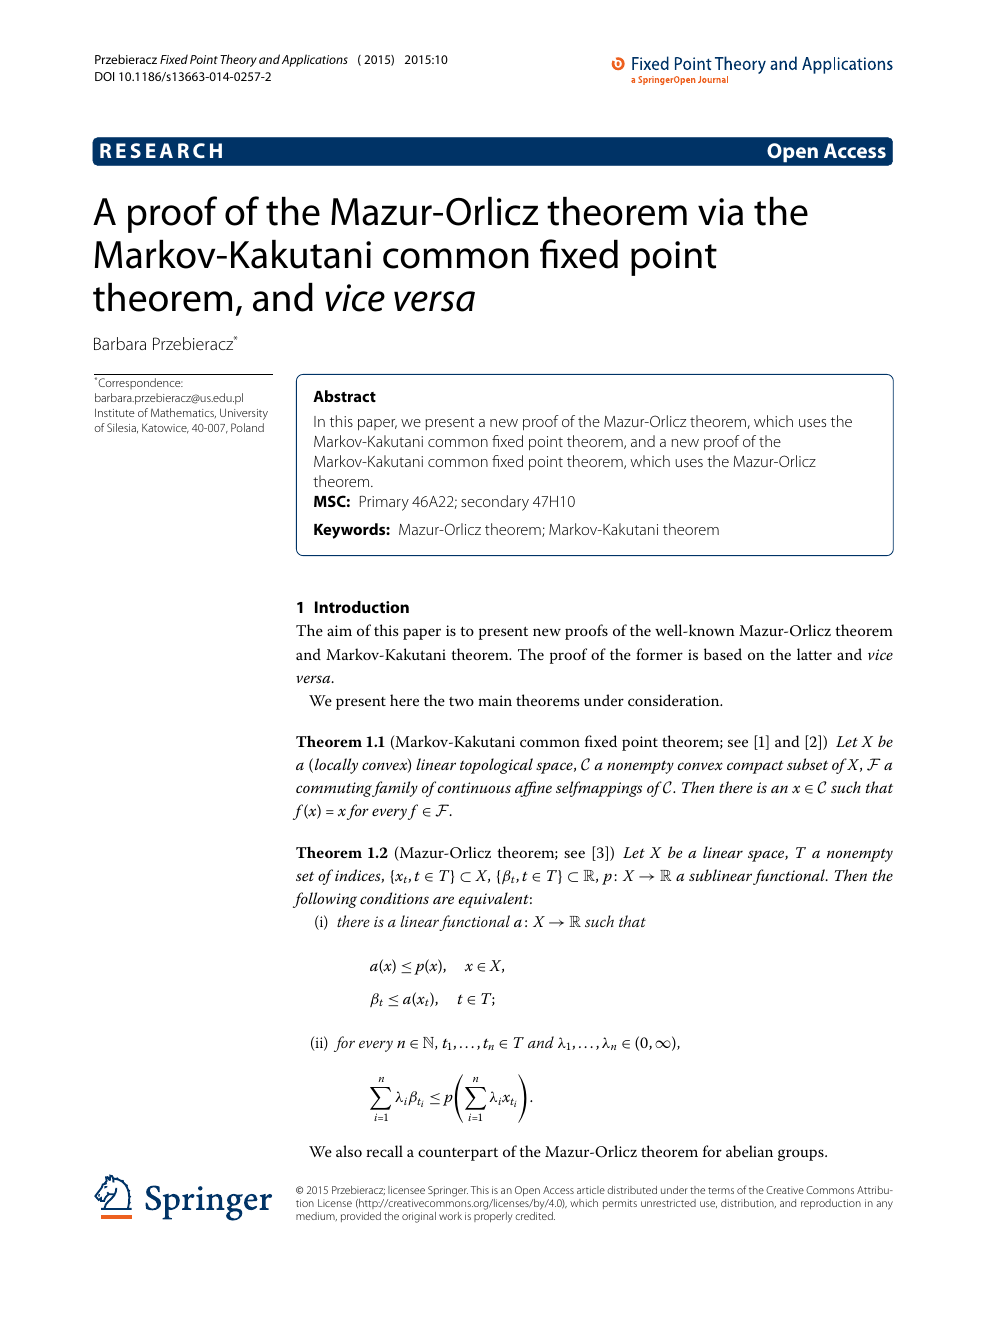 A Proof Of The Mazur Orlicz Theorem Via The Markov Kakutani Common Fixed Point Theorem And Vice Versa Topic Of Research Paper In Mathematics Download Scholarly Article Pdf And Read For Free On